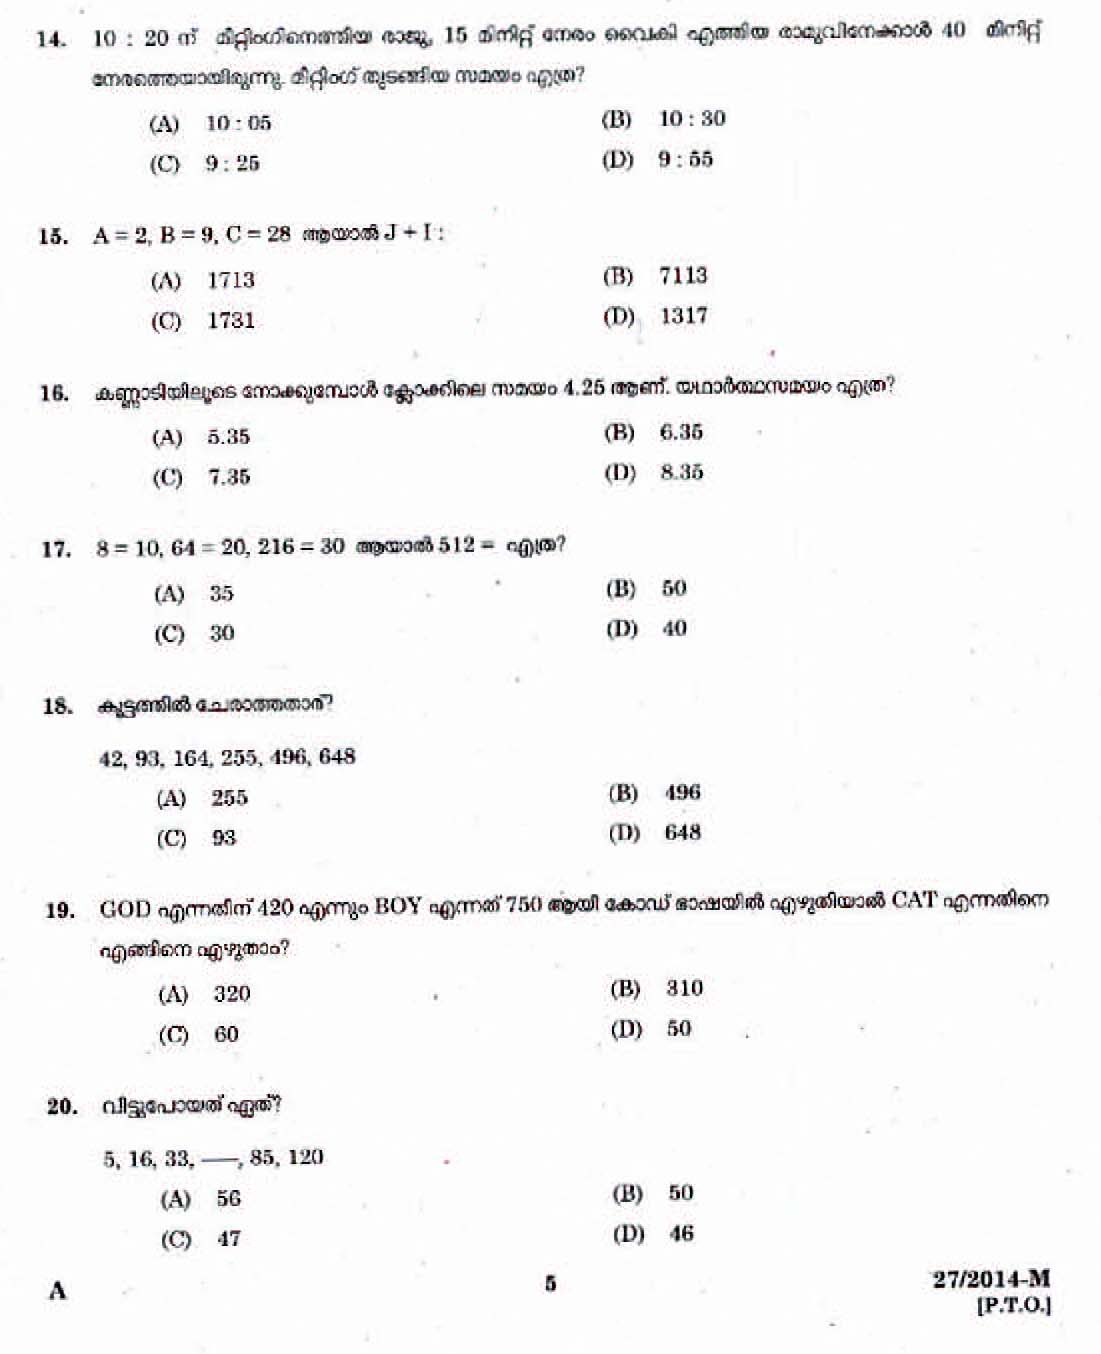 LD Clerk All Districts Question Paper Malayalam 2014 Paper Code 272014 M 3